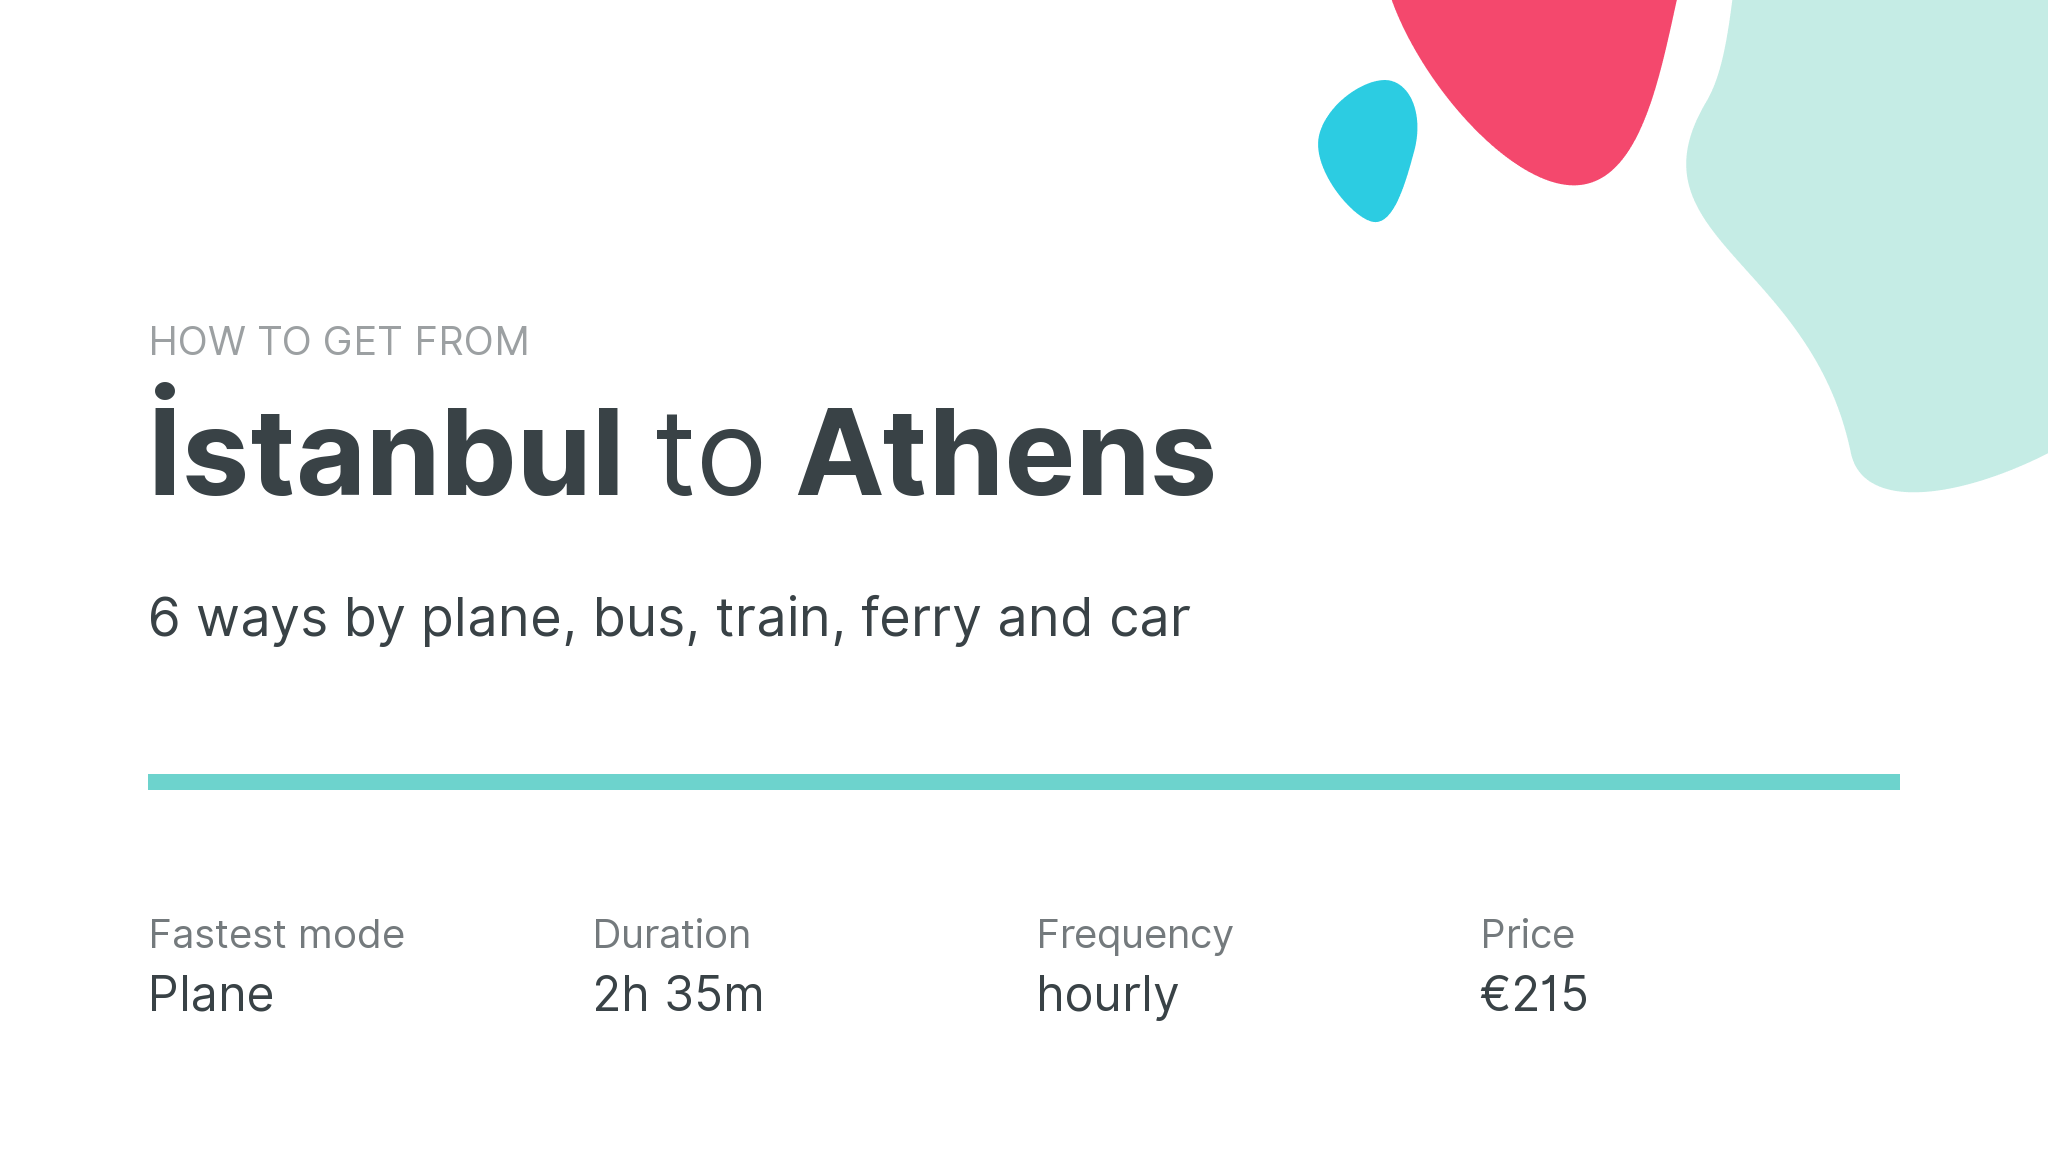 How do I get from İstanbul to Athens